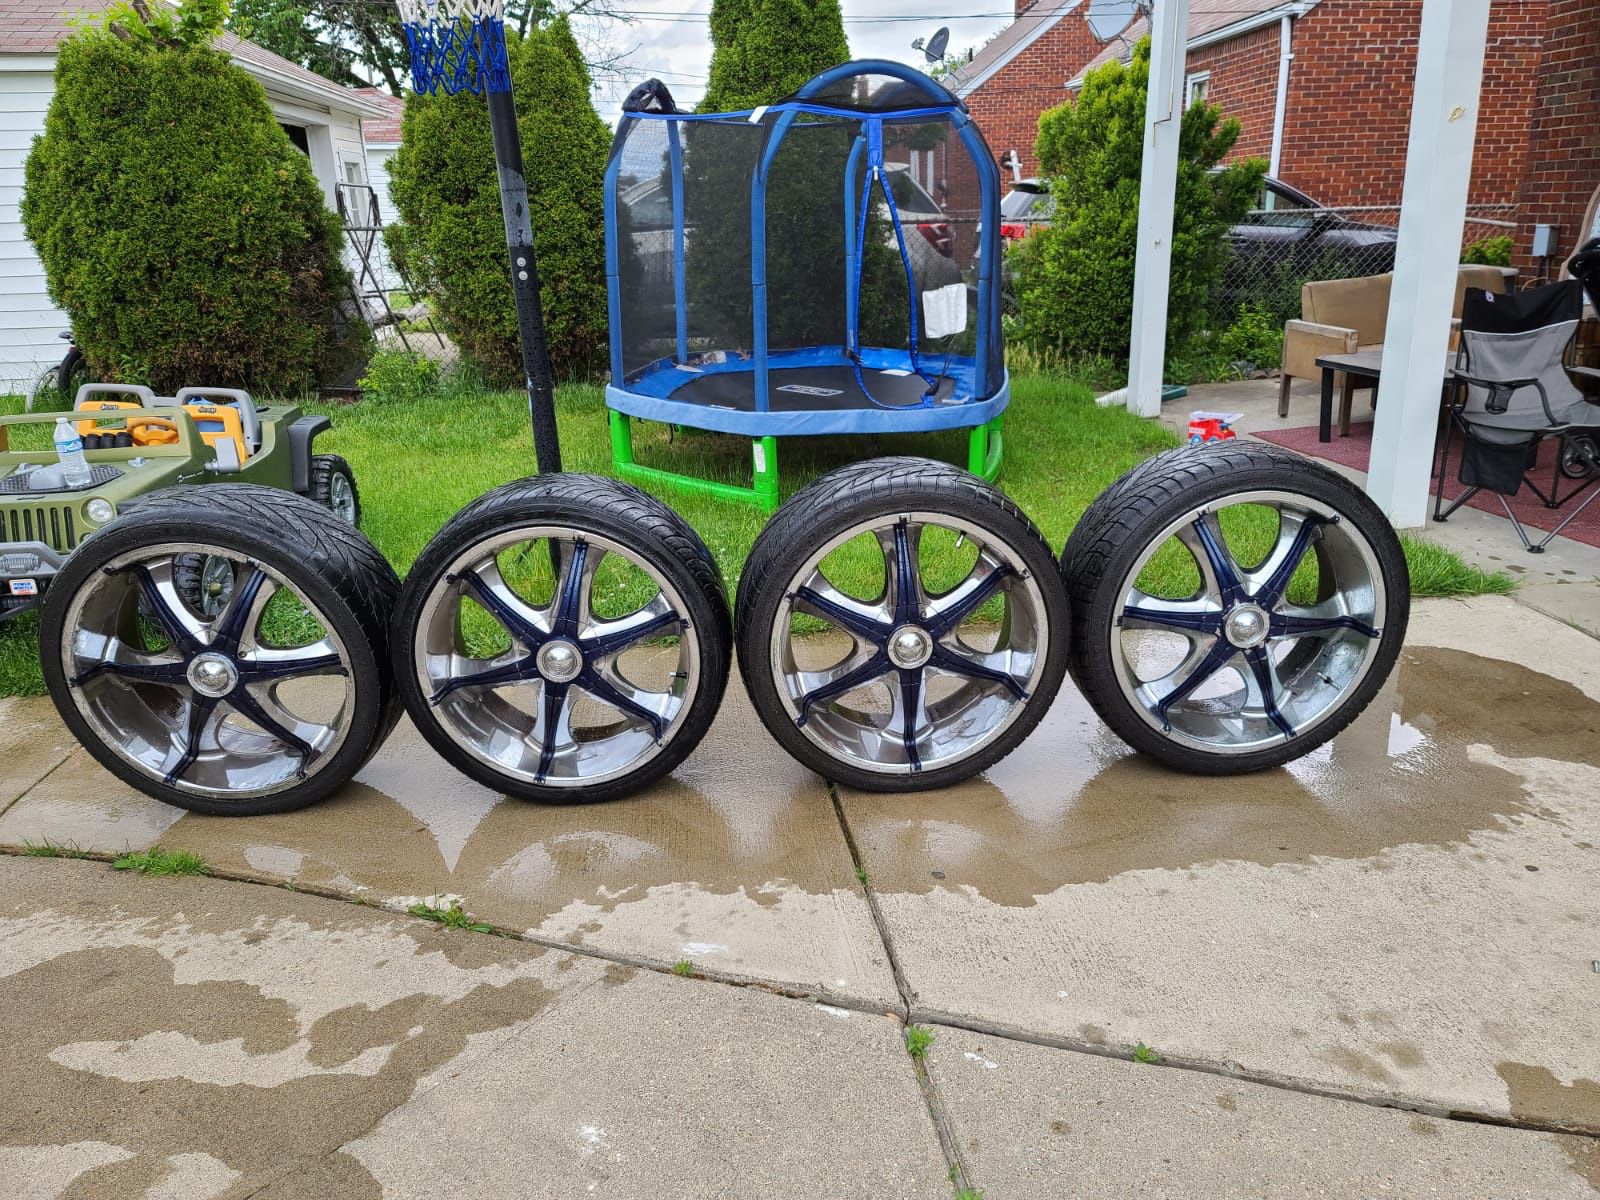 Rams with tires for 2003 trailer blazer 22 inch were on the blazer